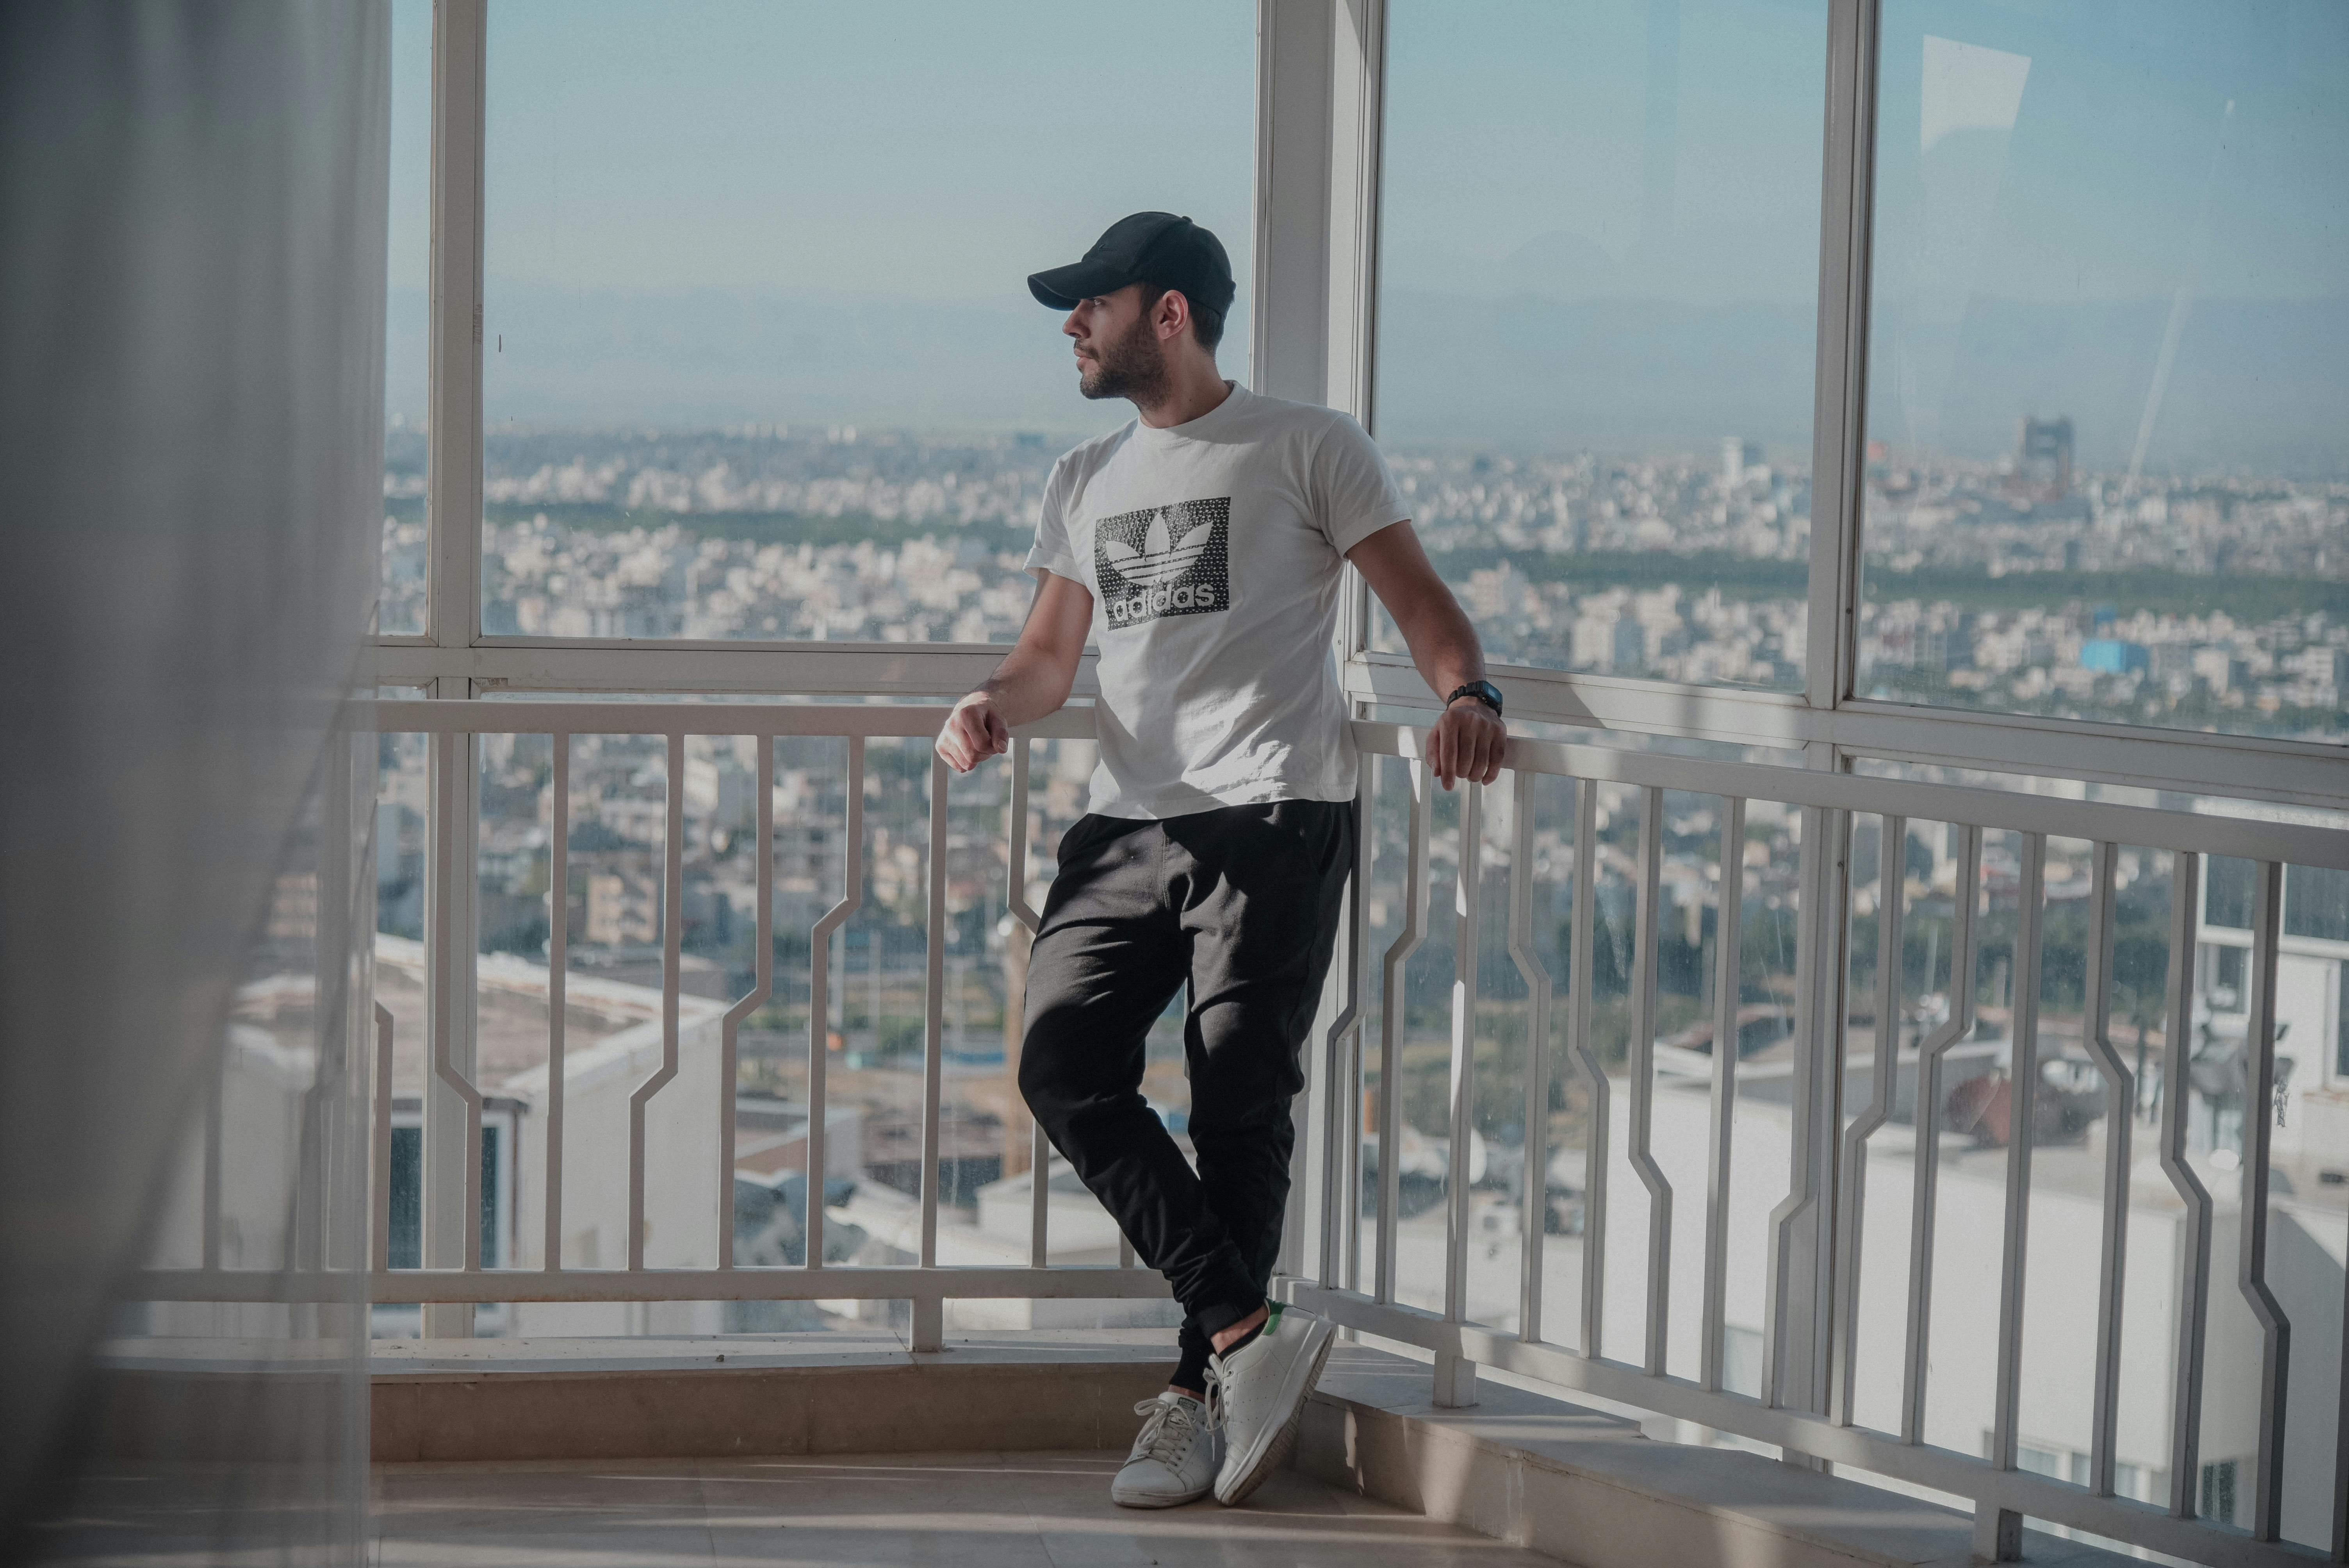 iranian dude and view